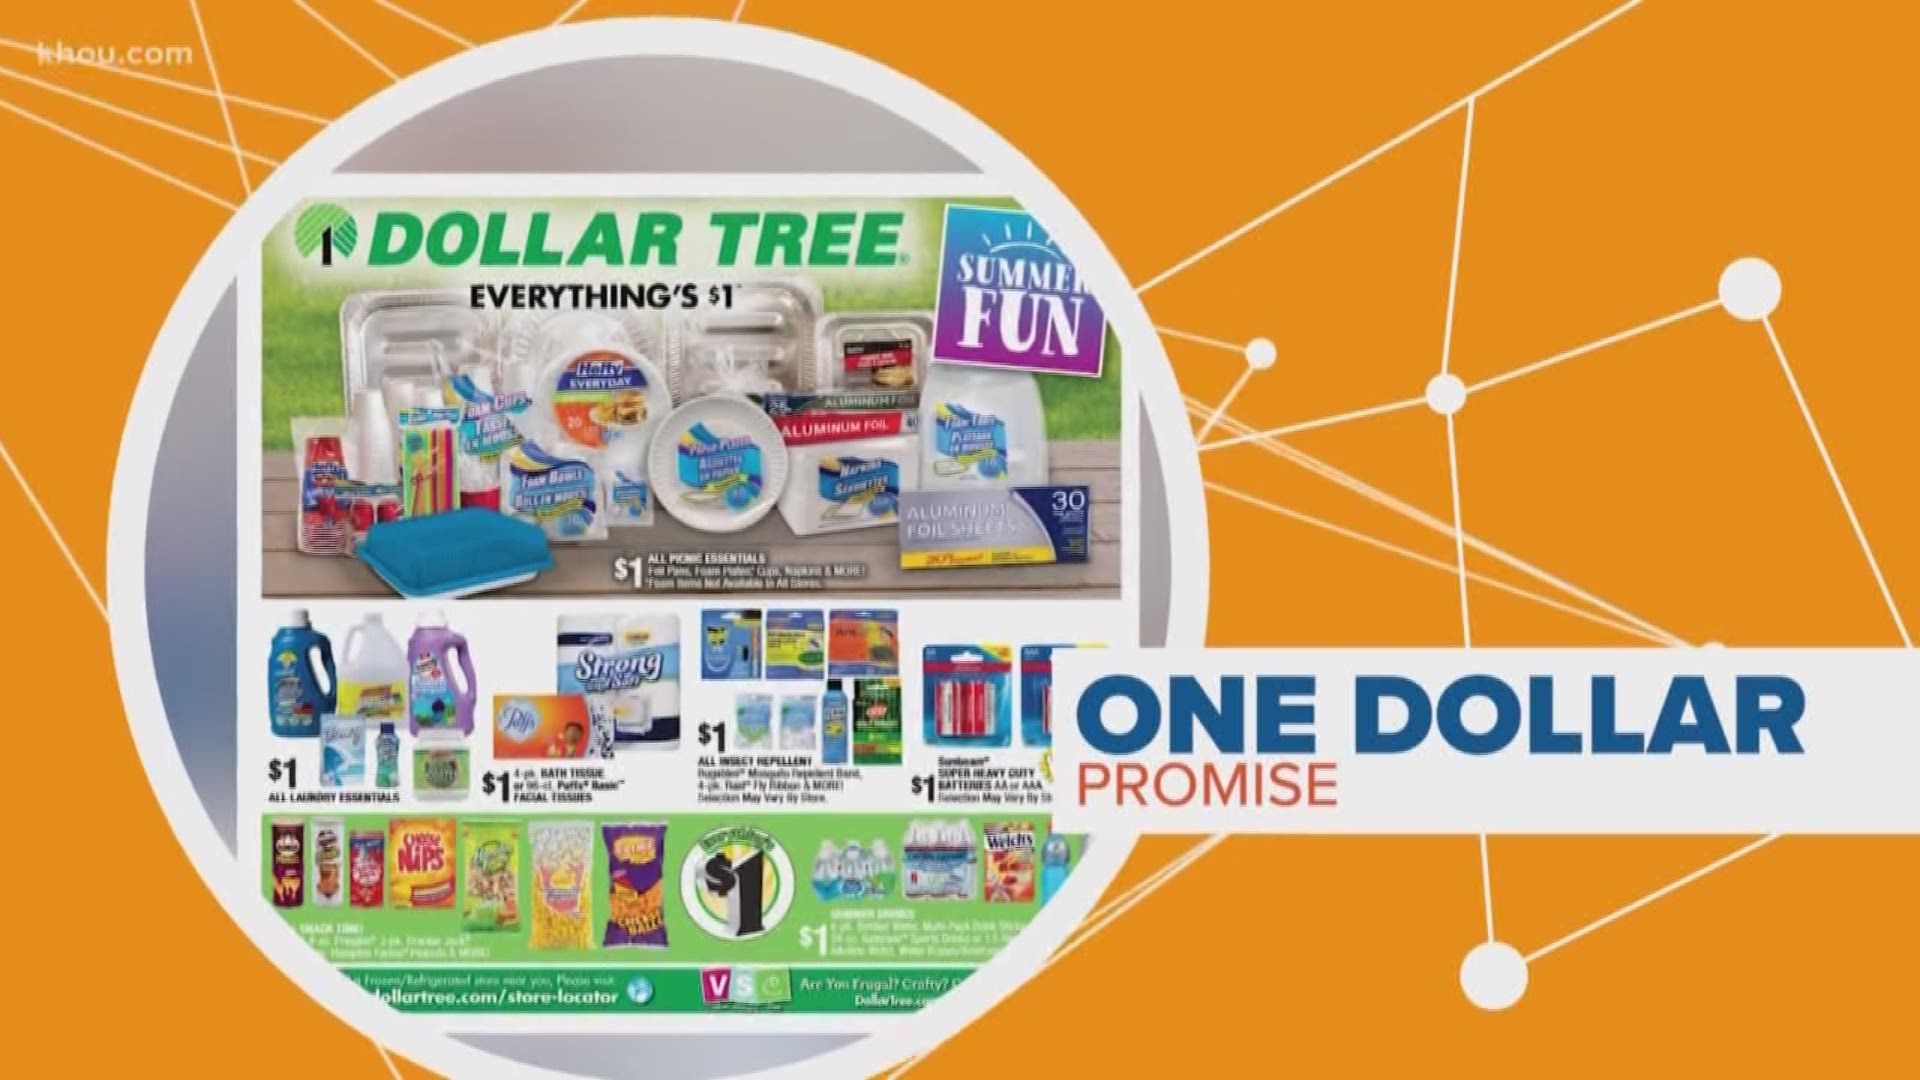 Shopping at Dollar Tree may not cost you just a dollar for long. The chain is about to pass-on a price hike to shoppers. Lauren Talarico connects the dots.